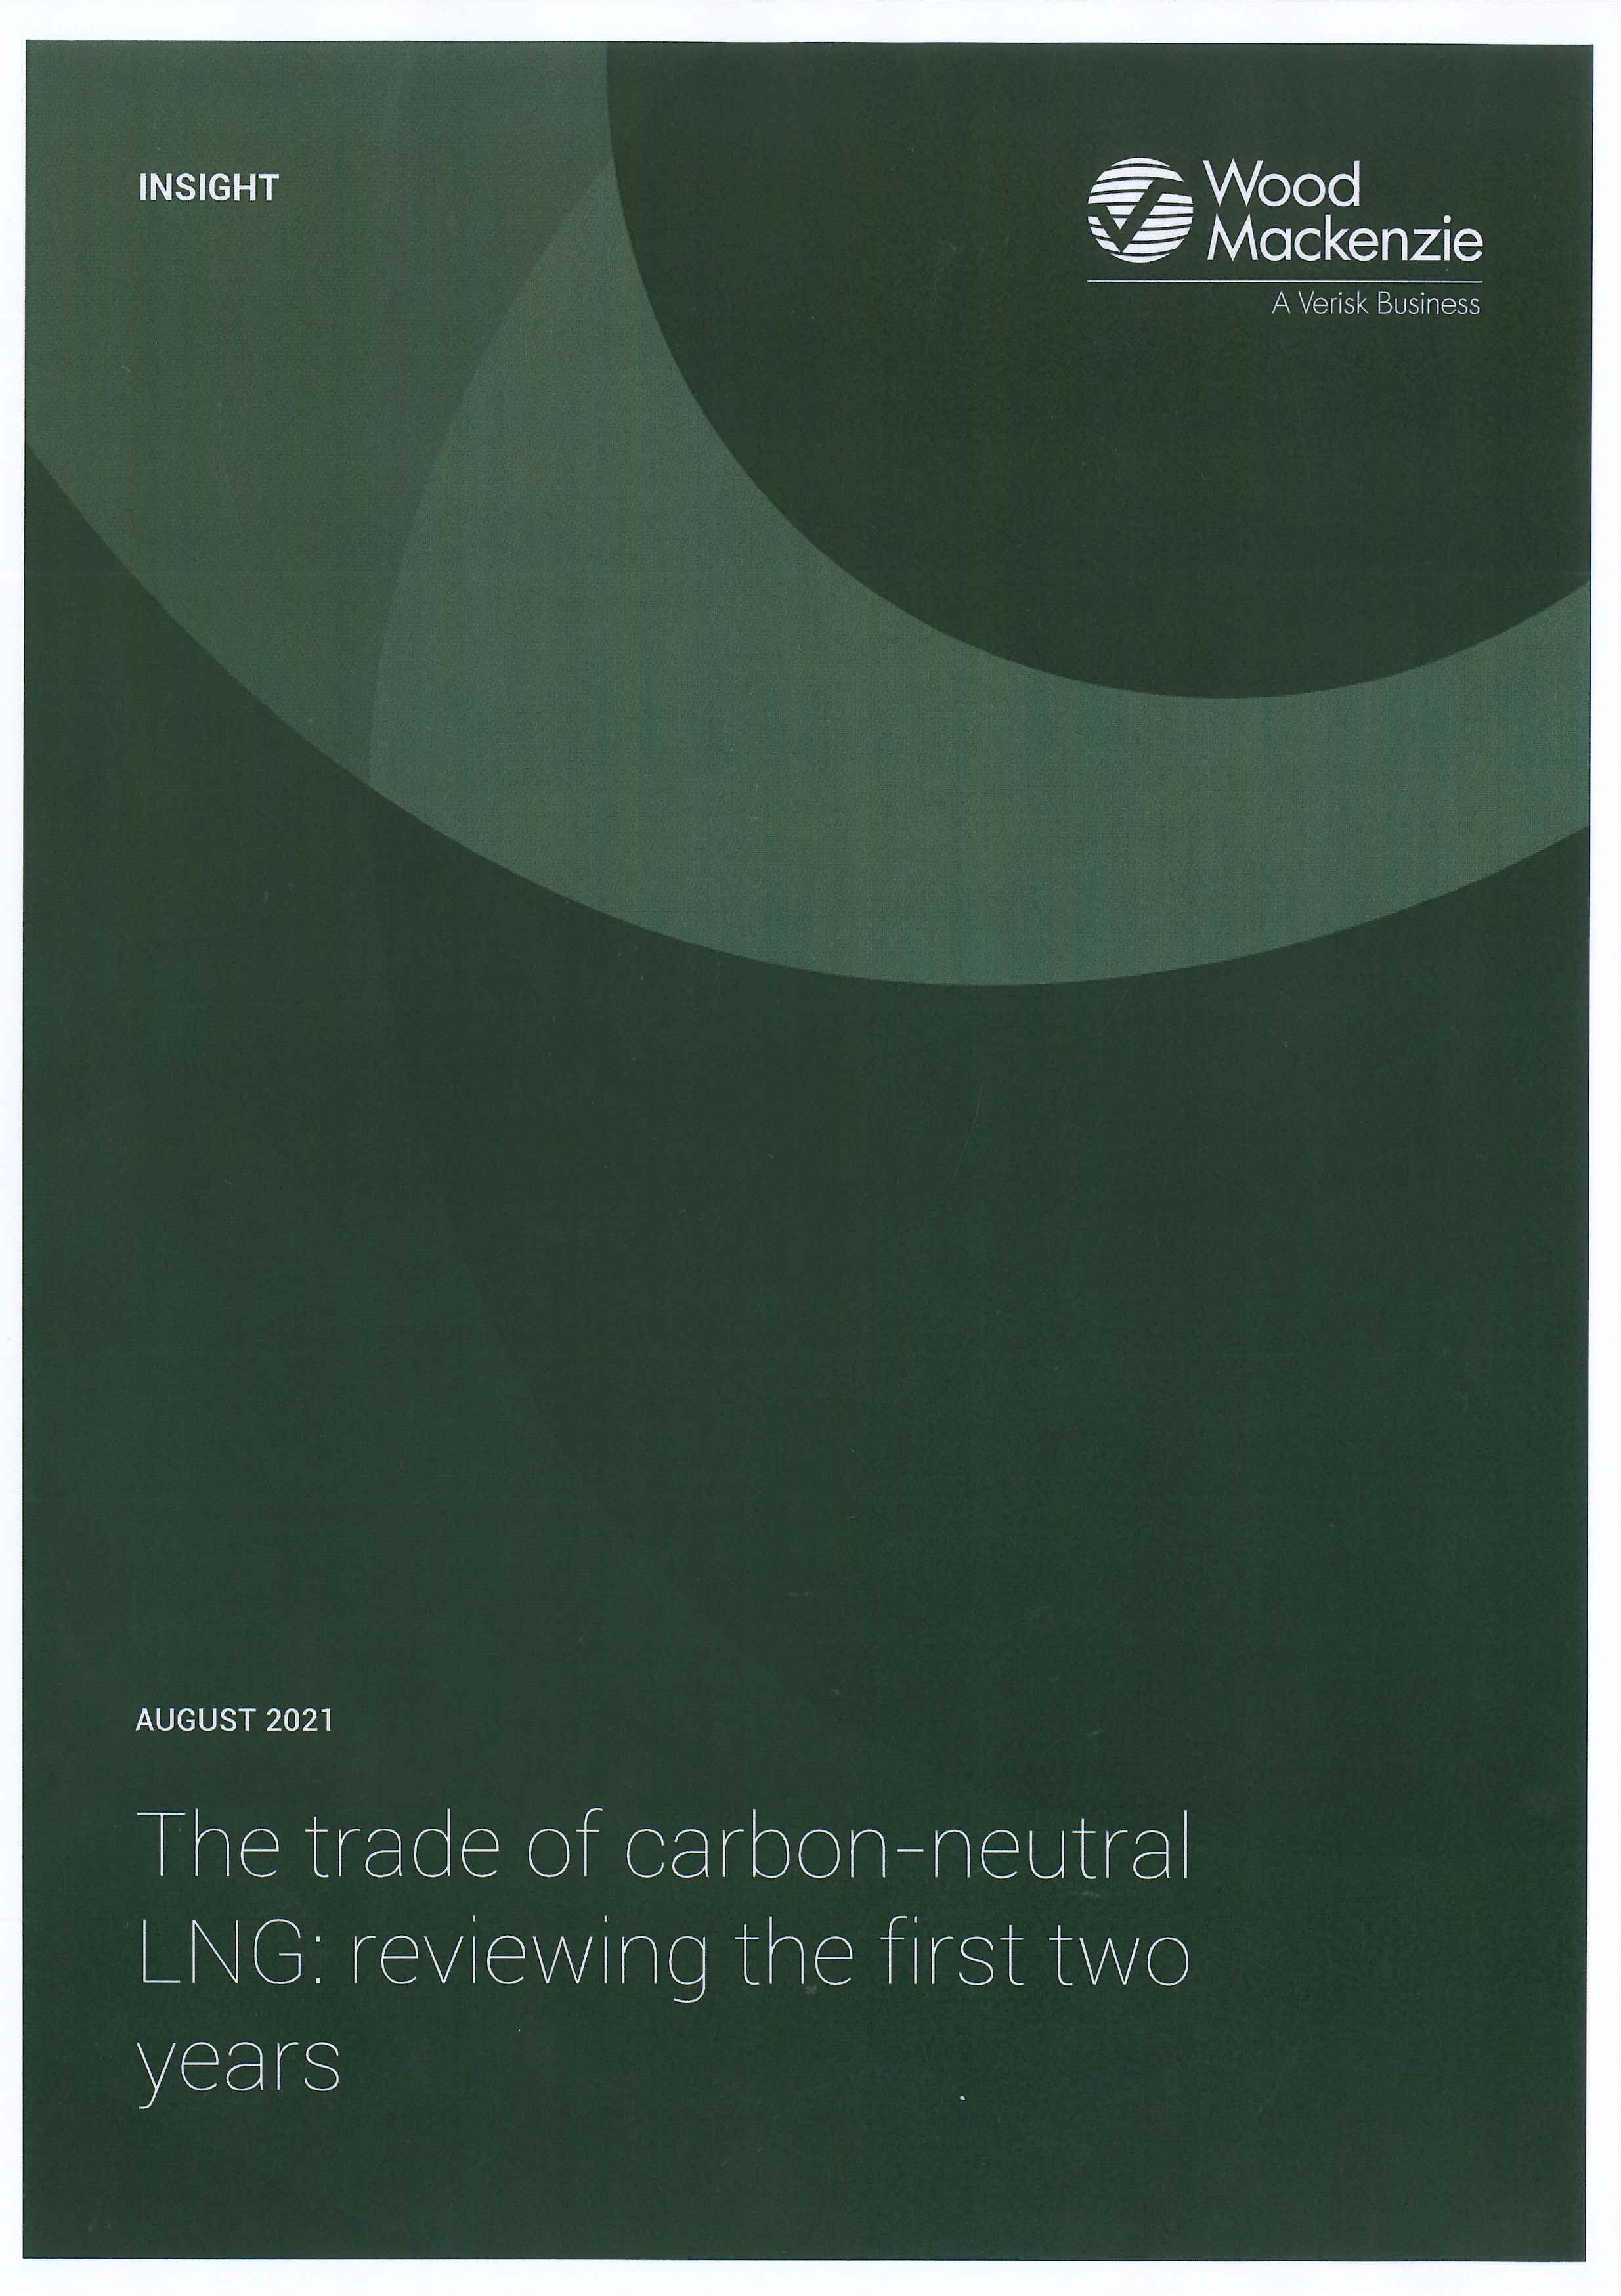 The trade of carbon-neutral LNG [e-book]:reviewing the first two years.